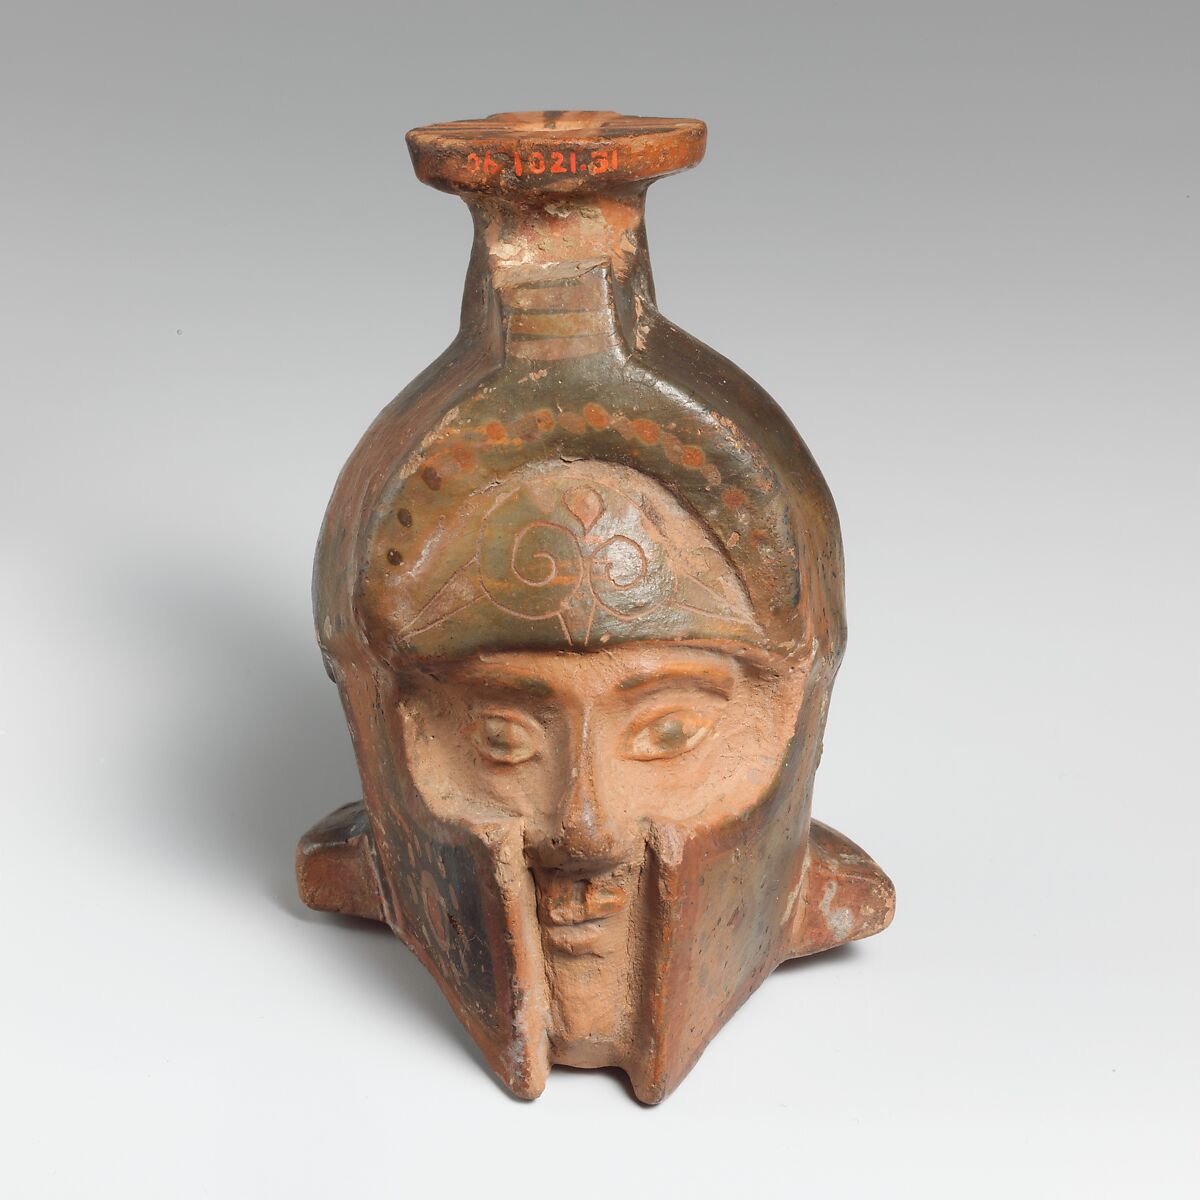 Aryballos (perfume flask) in the form of a helmeted head, Terracotta, East Greek 